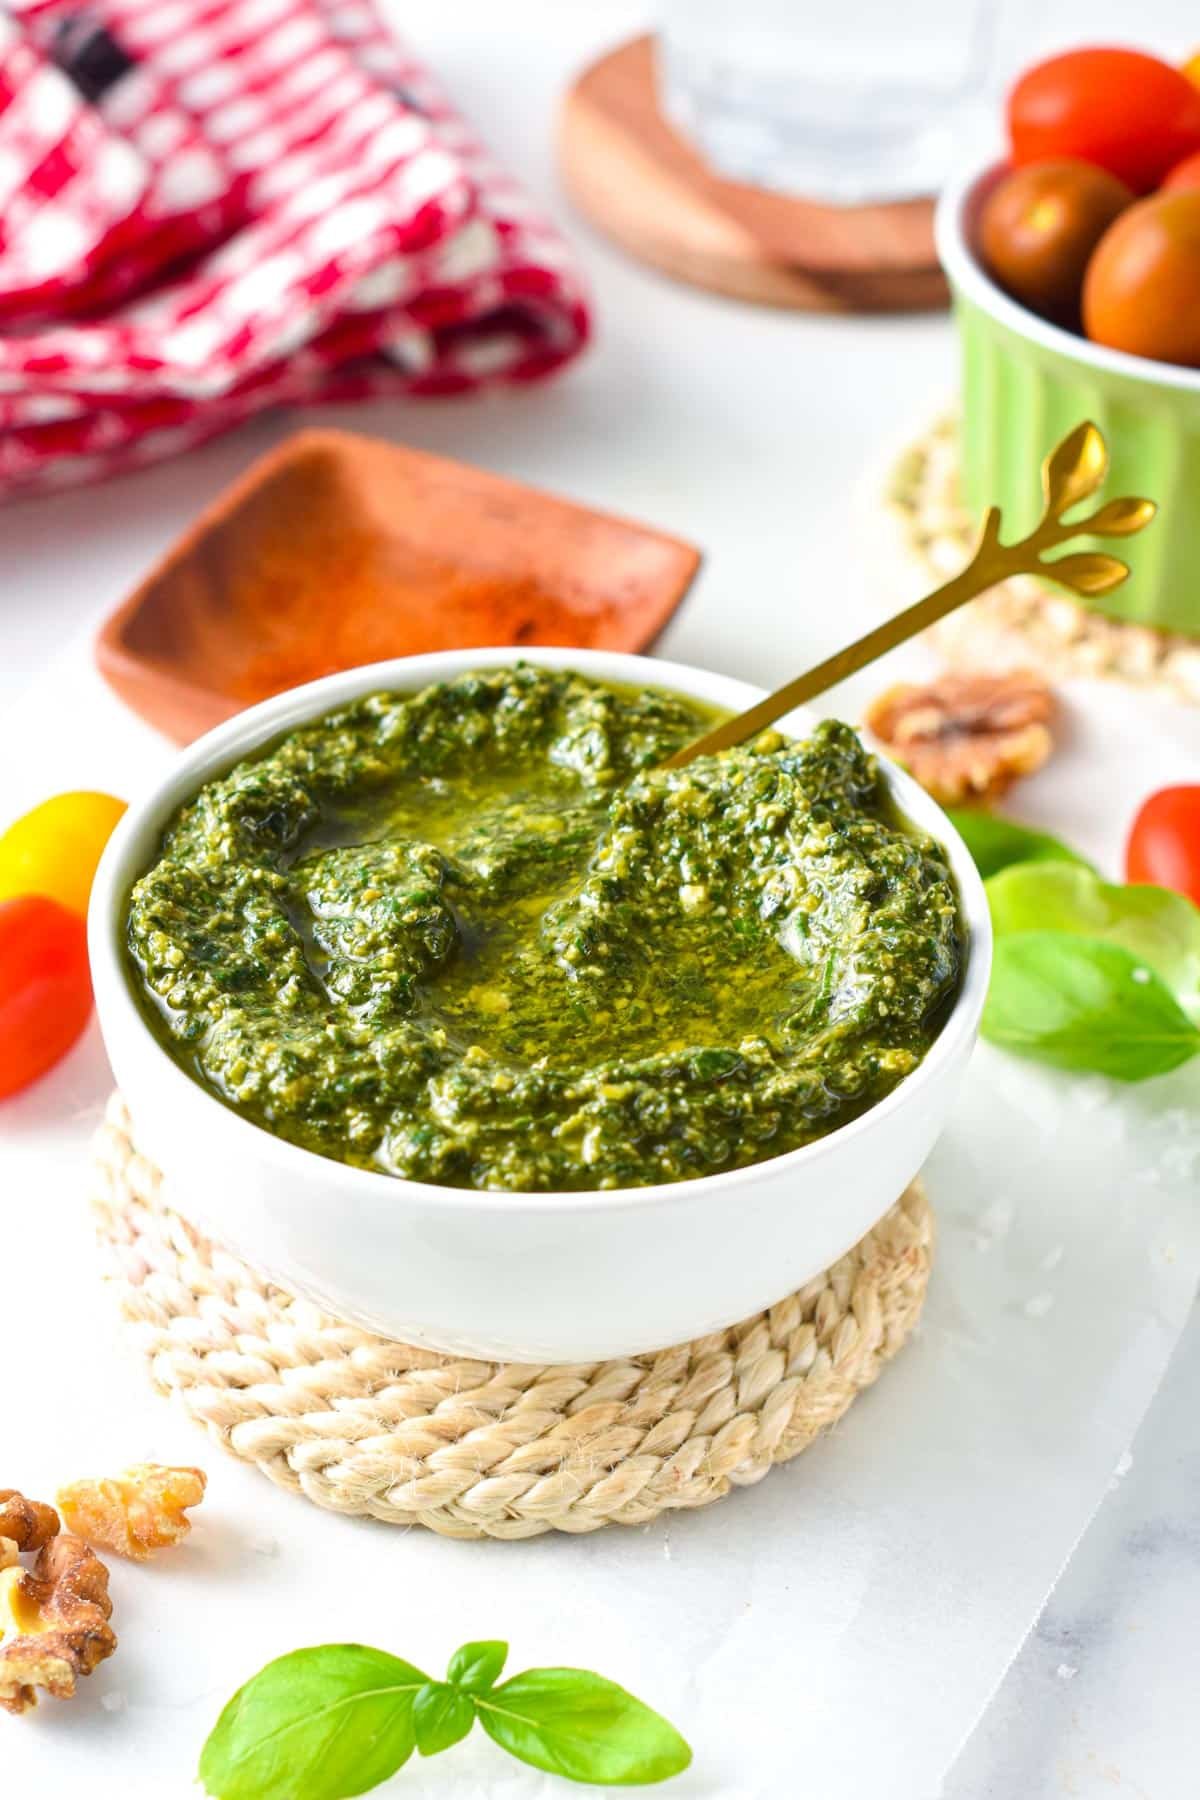 This Pesto without pine nuts is an easy healthy pesto perfect if you run out of pine nuts or have nuts allergies. Plus, this pesto recipe is ready in barely 5 minutes, and use a good amount of basil to use the overgrown herbs in your garden.This Pesto without pine nuts is an easy healthy pesto perfect if you run out of pine nuts or have nuts allergies. Plus, this pesto recipe is ready in barely 5 minutes, and use a good amount of basil to use the overgrown herbs in your garden.